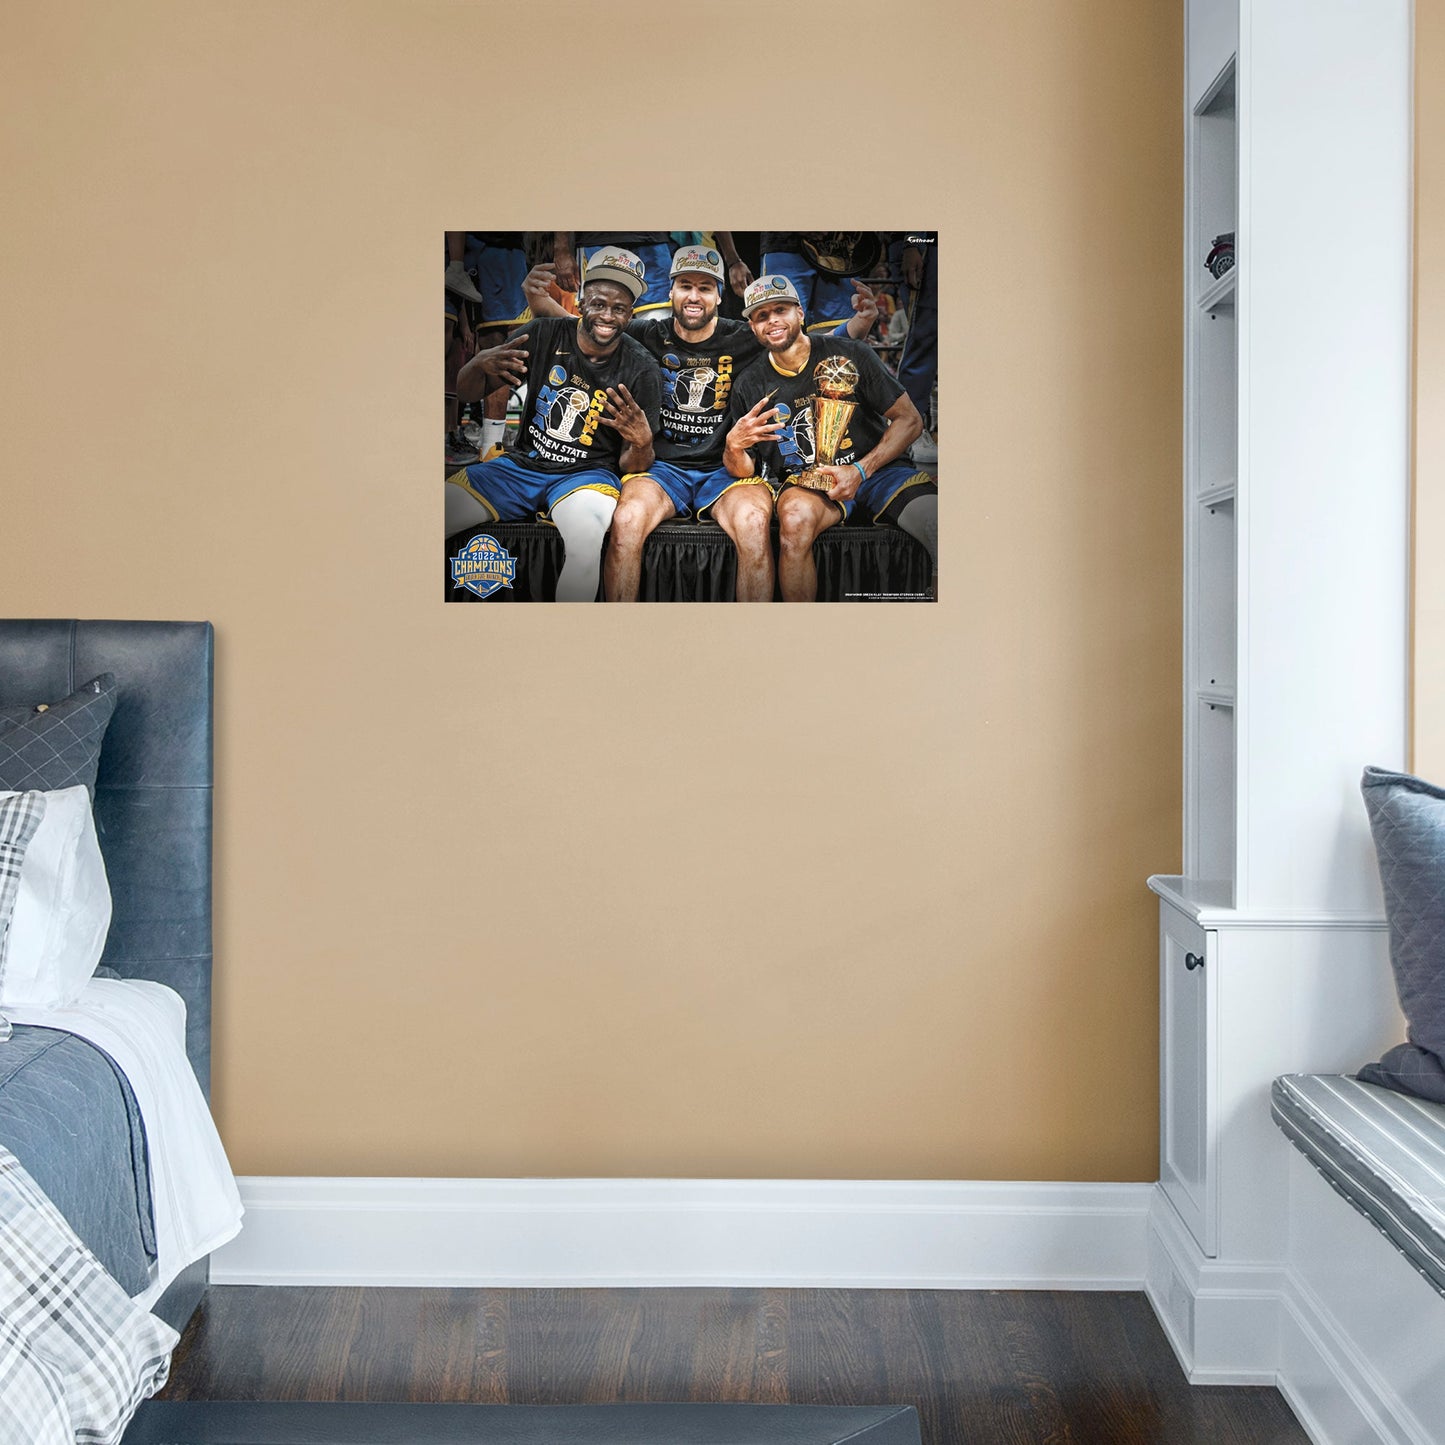 Golden State Warriors: Draymond Green, Klay Thompson and Stephen Curry 2022 Champions Group Poster - Officially Licensed NBA Removable Adhesive Decal